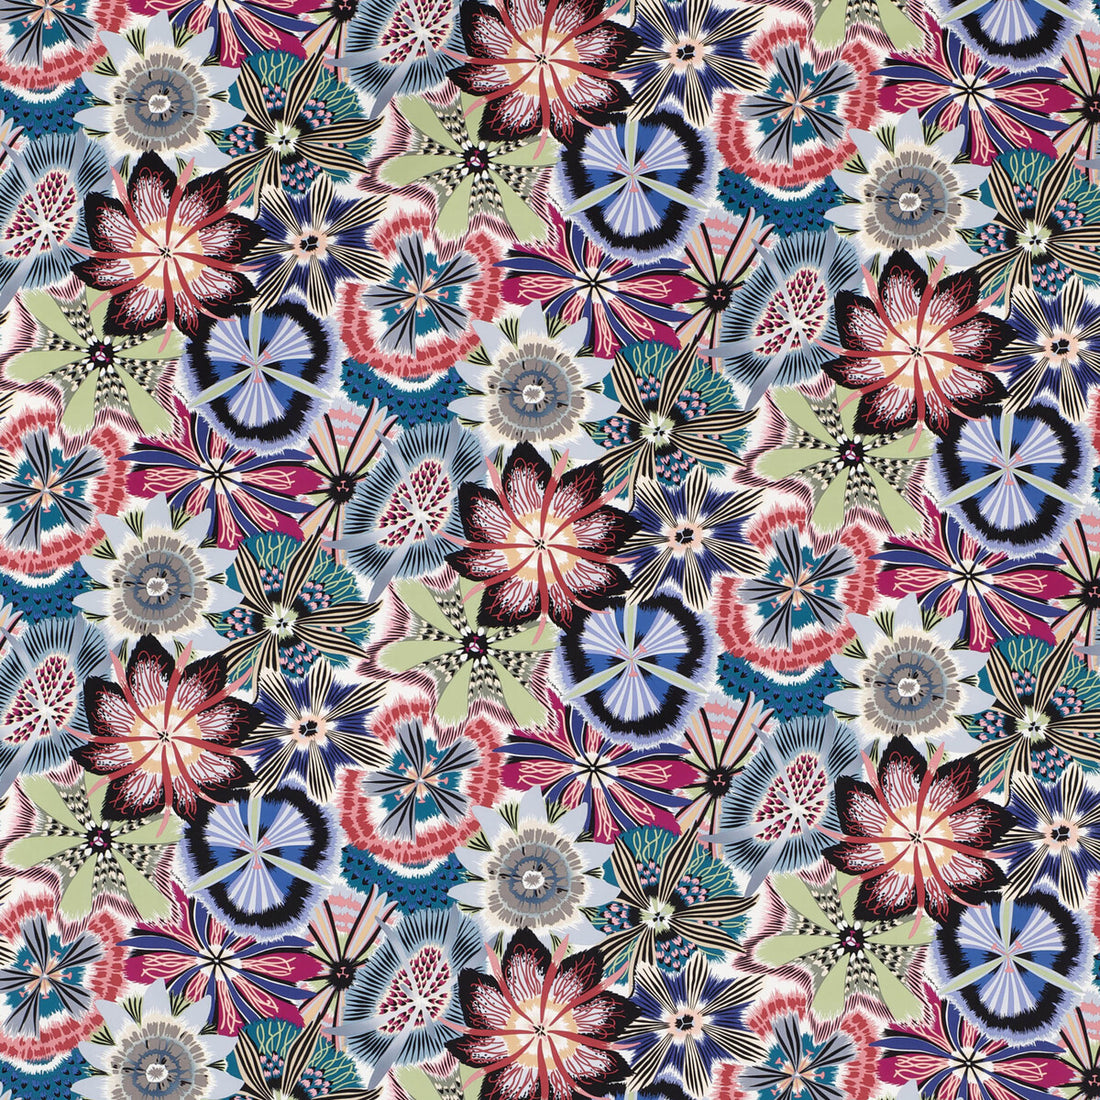 Passiflora fabric in t50 color - pattern 36181.517.0 - by Kravet Couture in the Missoni Home collection